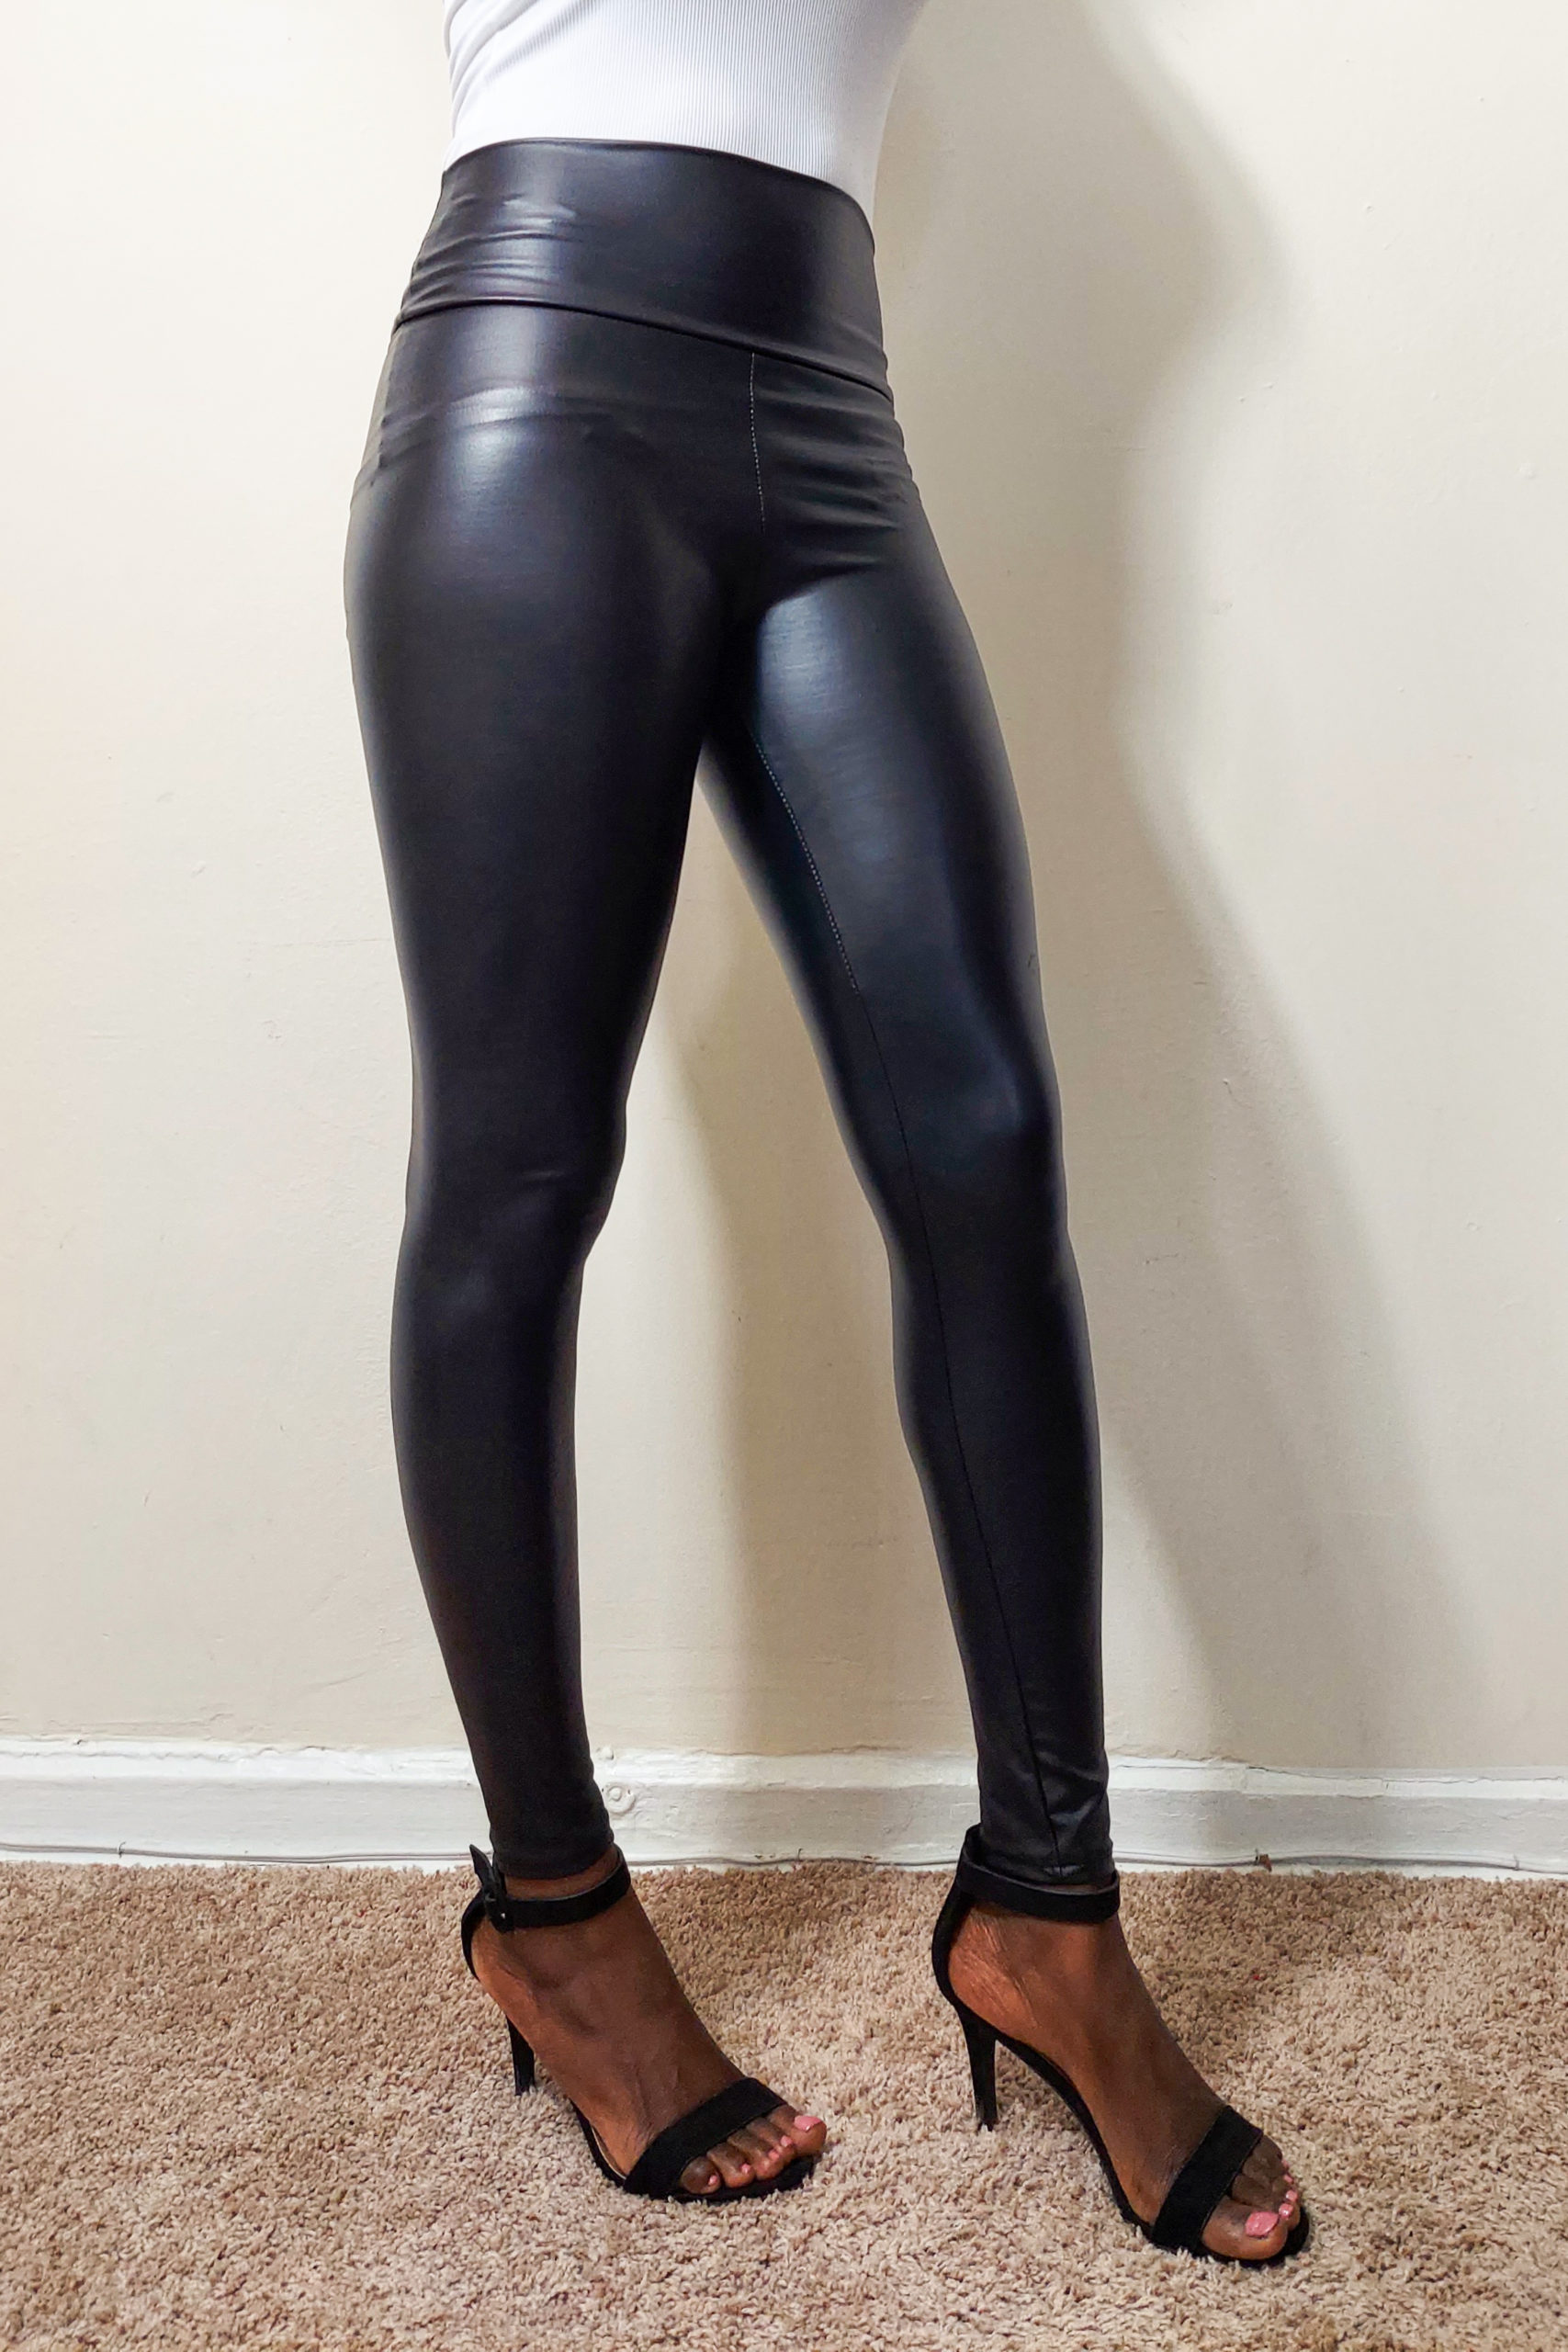 NEW SPANX READY TO WOW! 2437 SEXY FAUX LEATHER BLACK LEGGING PANTS S M L XL